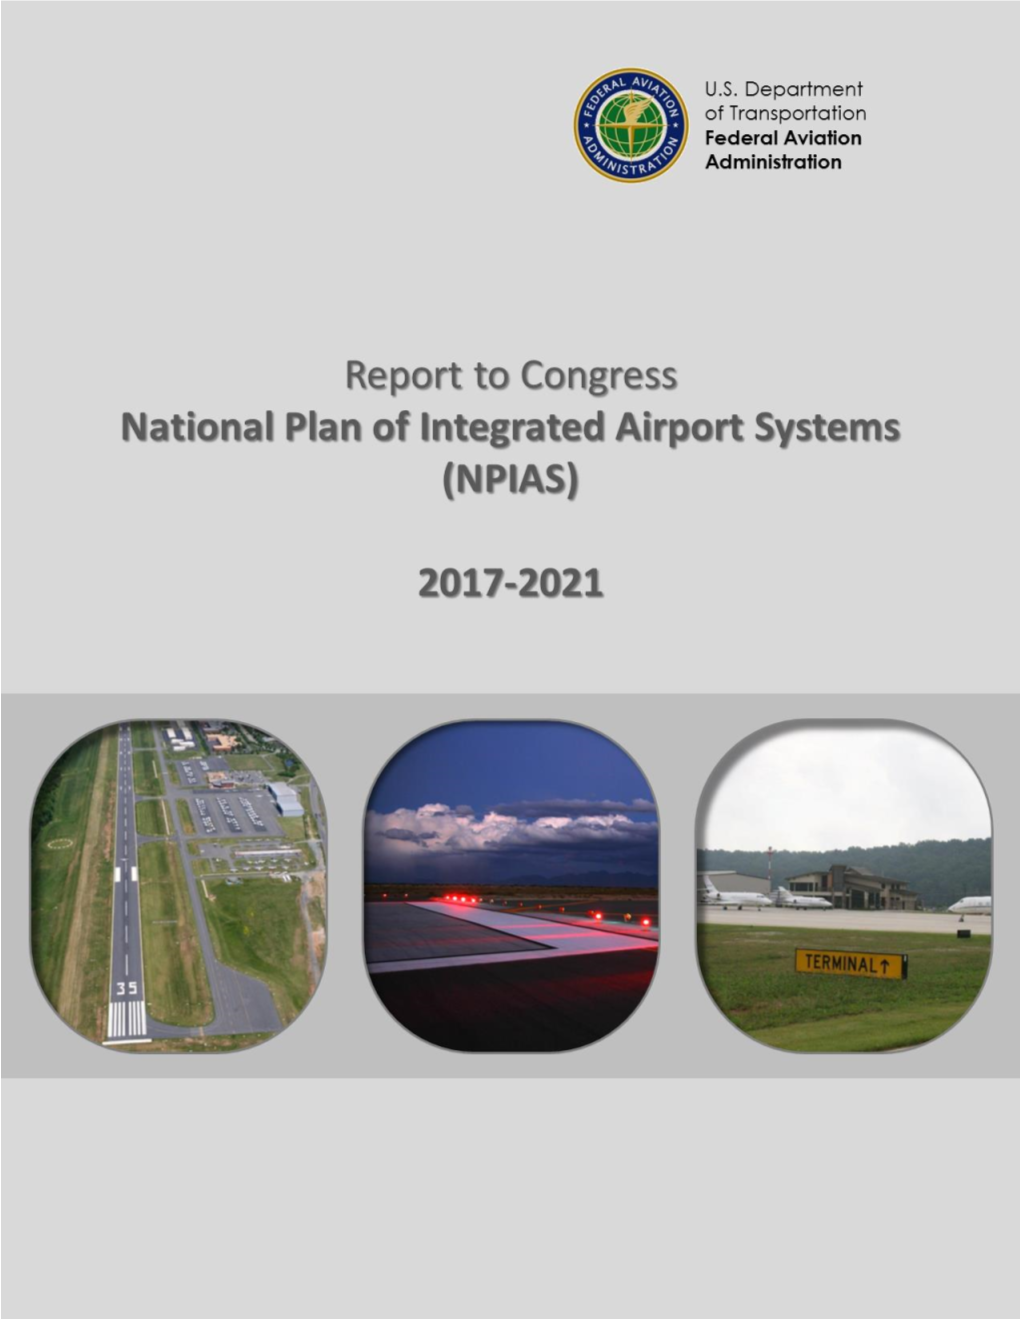 National Plan of Integrated Airport Systems (NPIAS): 2017-2021